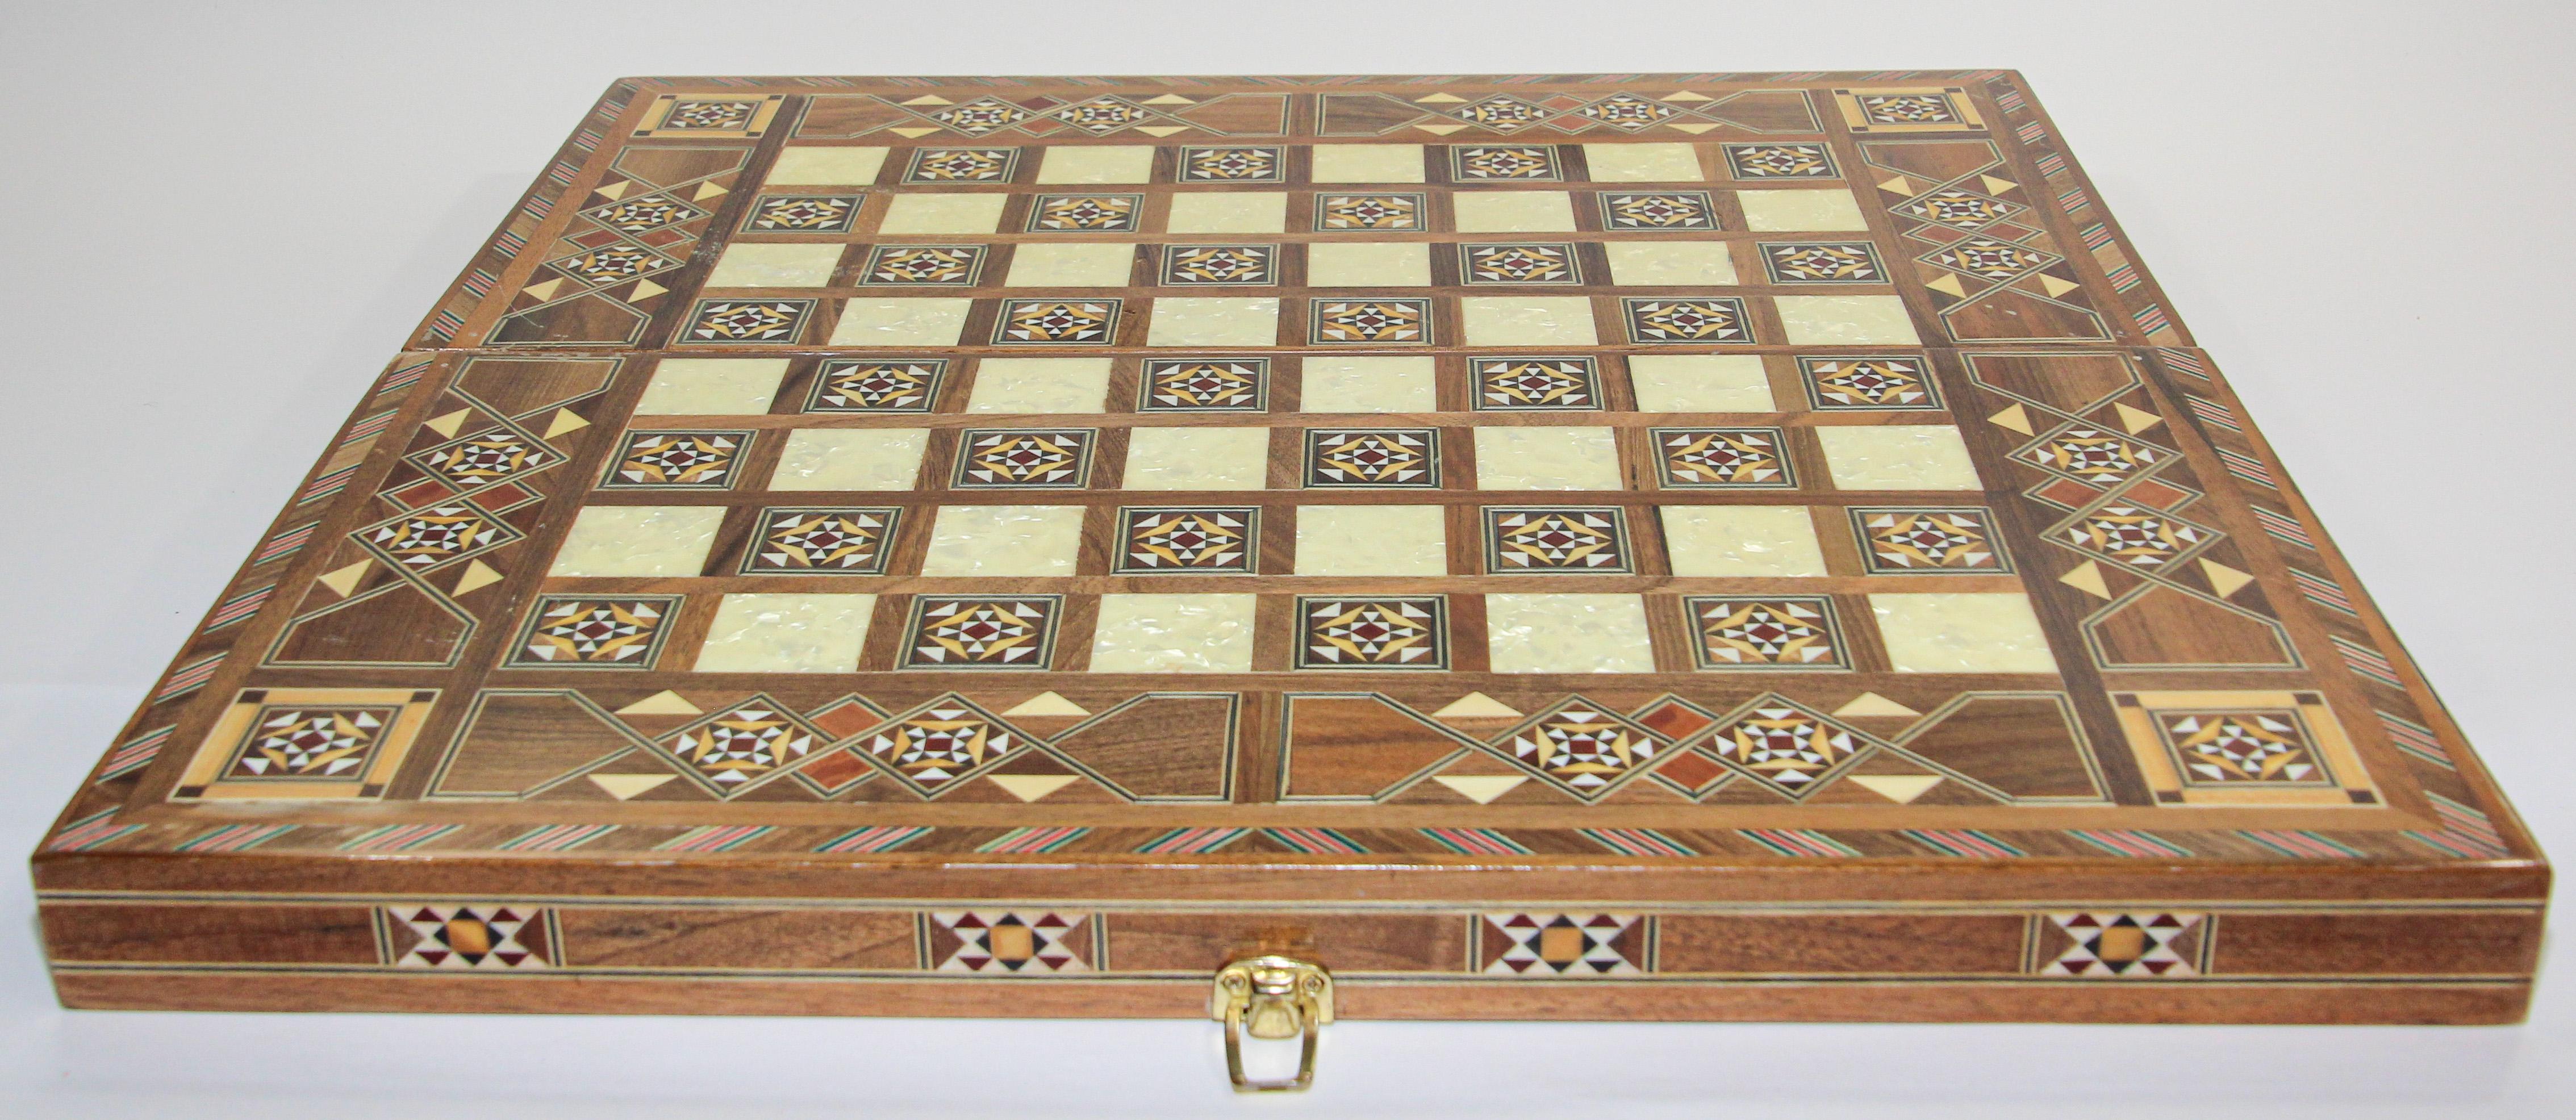 Vintage Midcentury Large Complete Inlaid Mosaic Backgammon and Chess Game For Sale 4